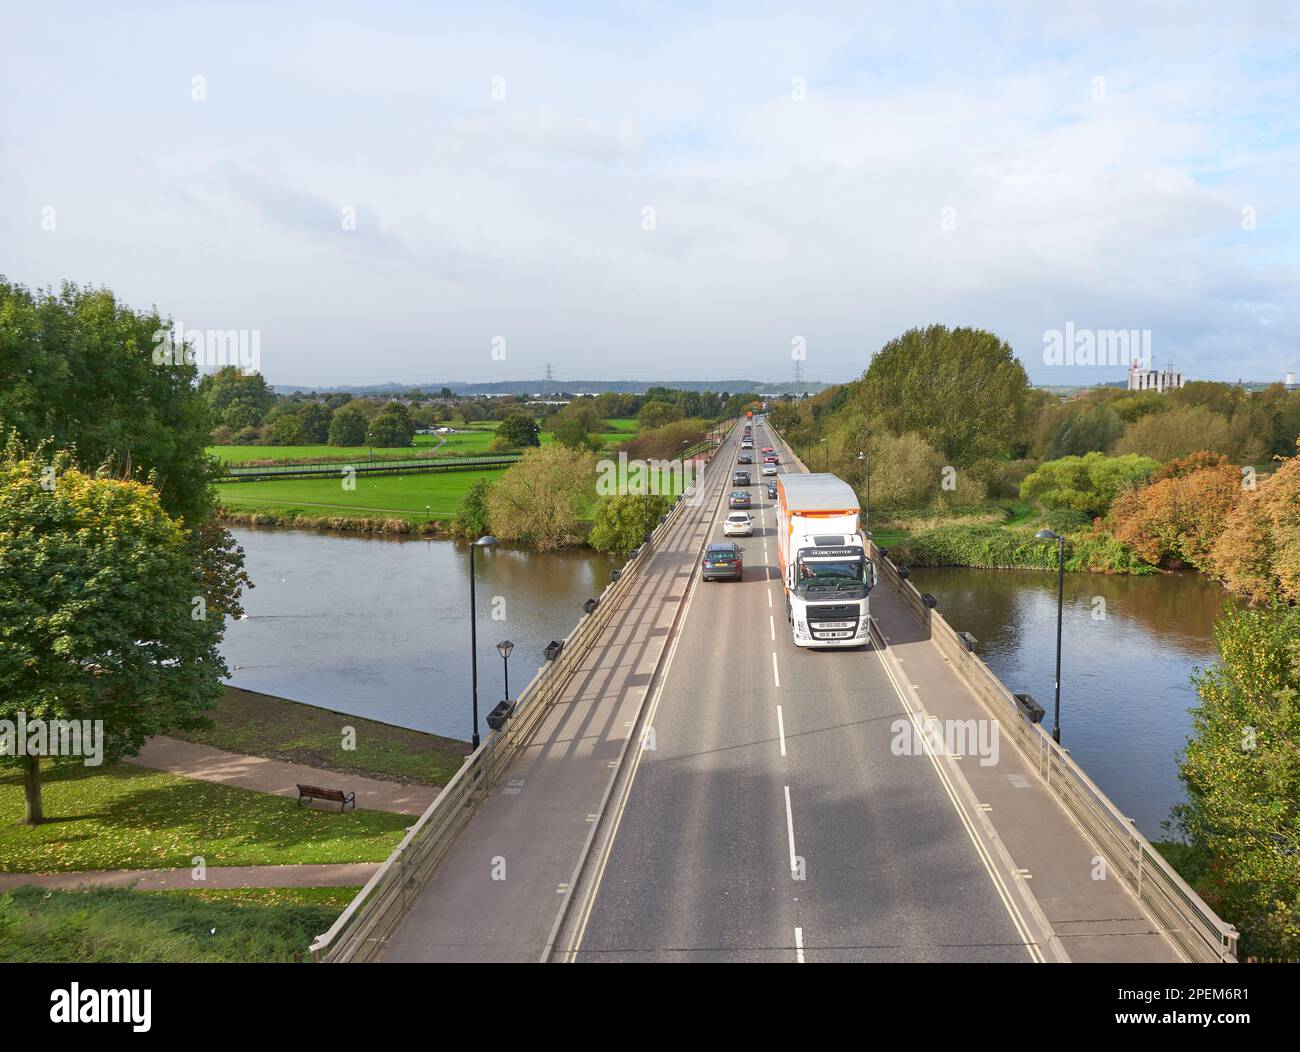 Articulated lorry on a bridge over the River Trent in Burton on Trent, UK Stock Photo